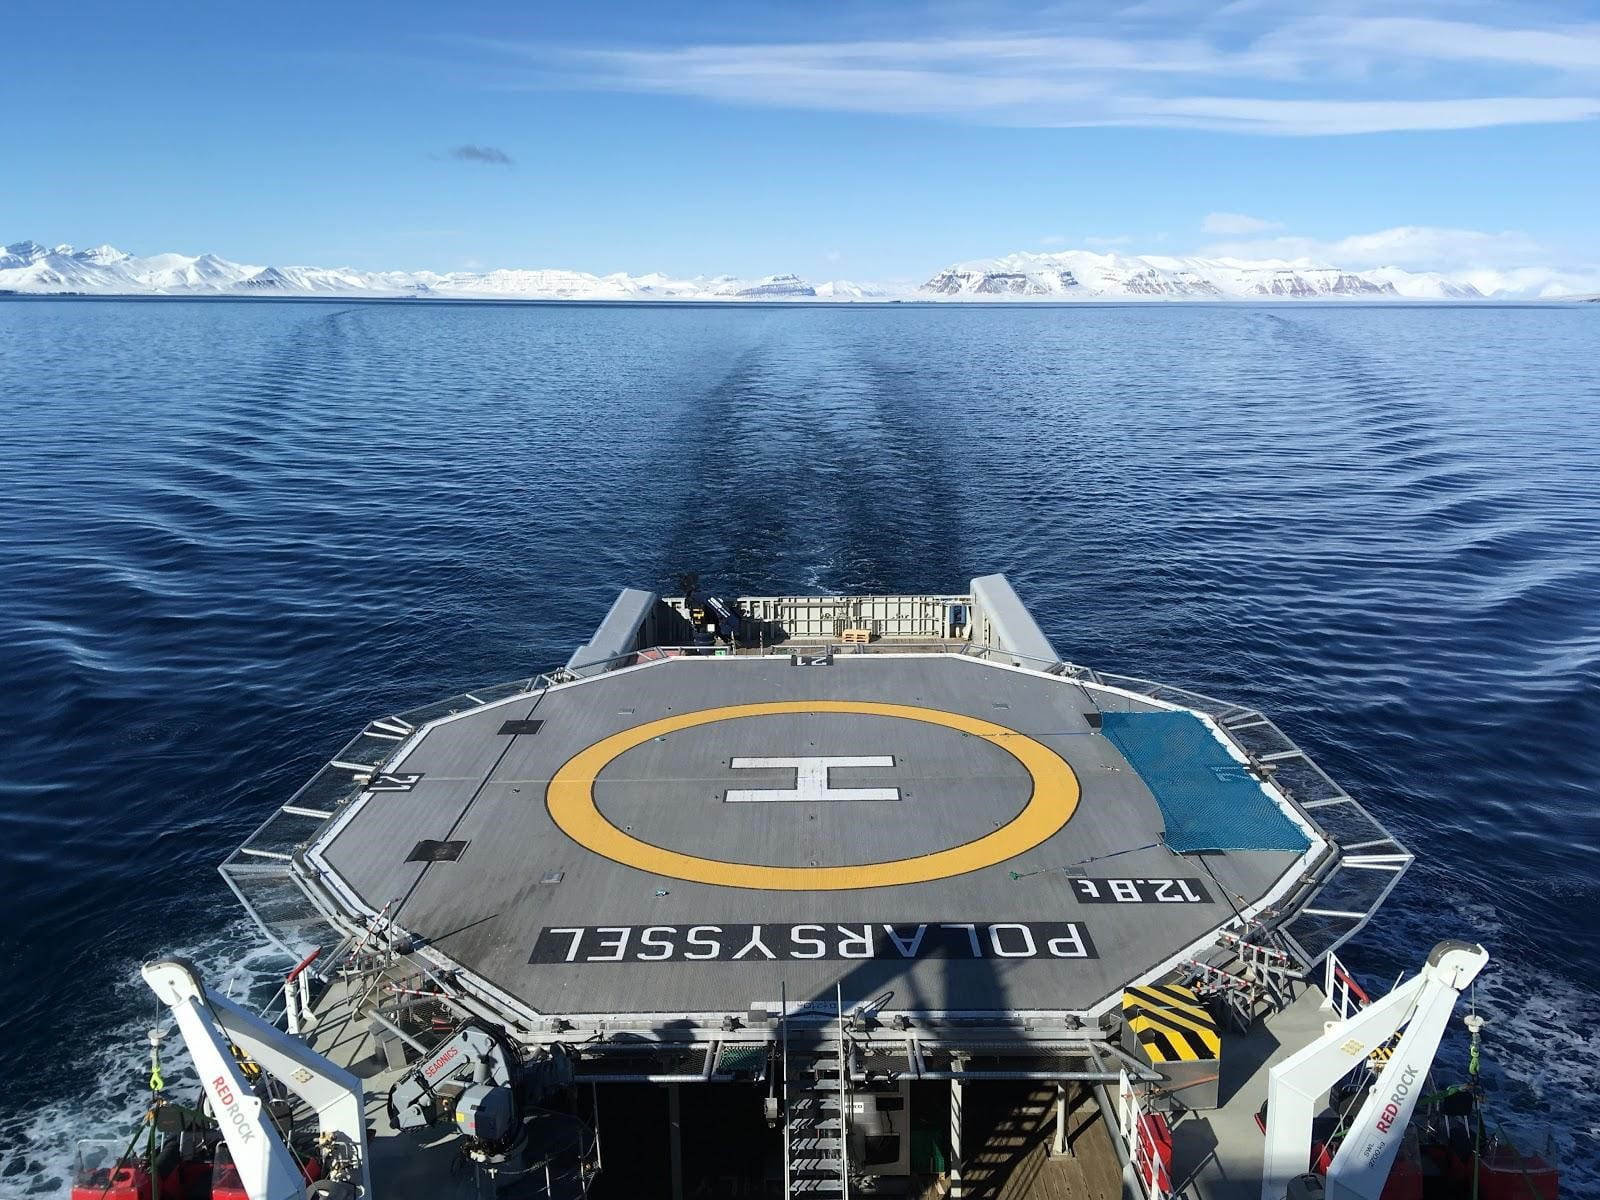 Large flat, government boat with letter H in yellow circle in Arctic waters